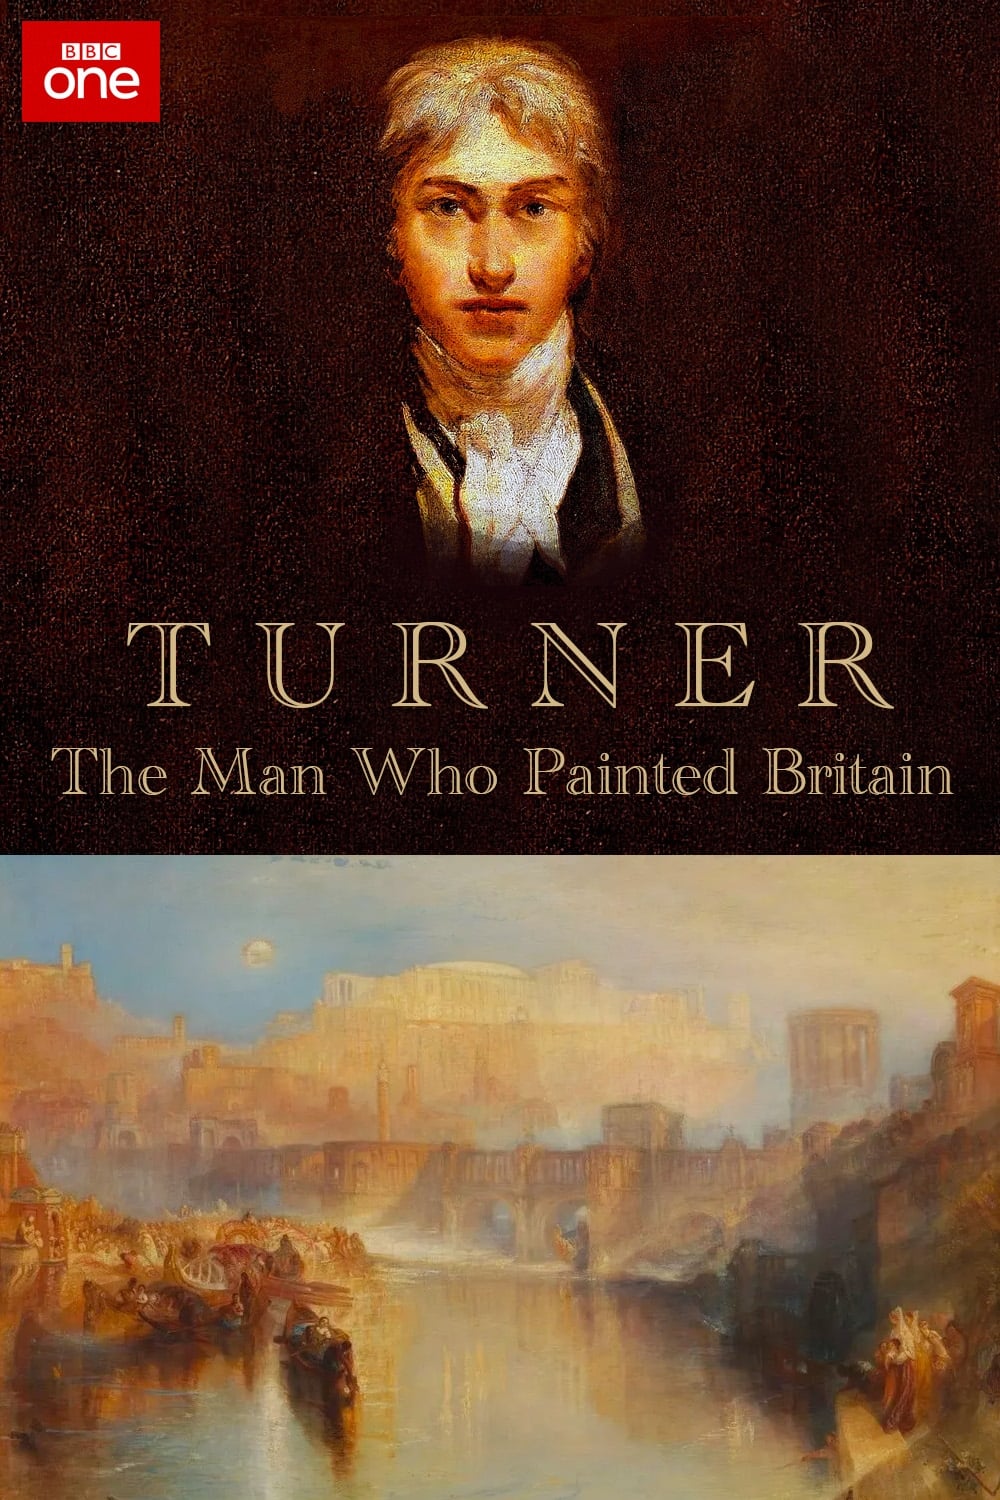 Turner: The Man Who Painted Britain